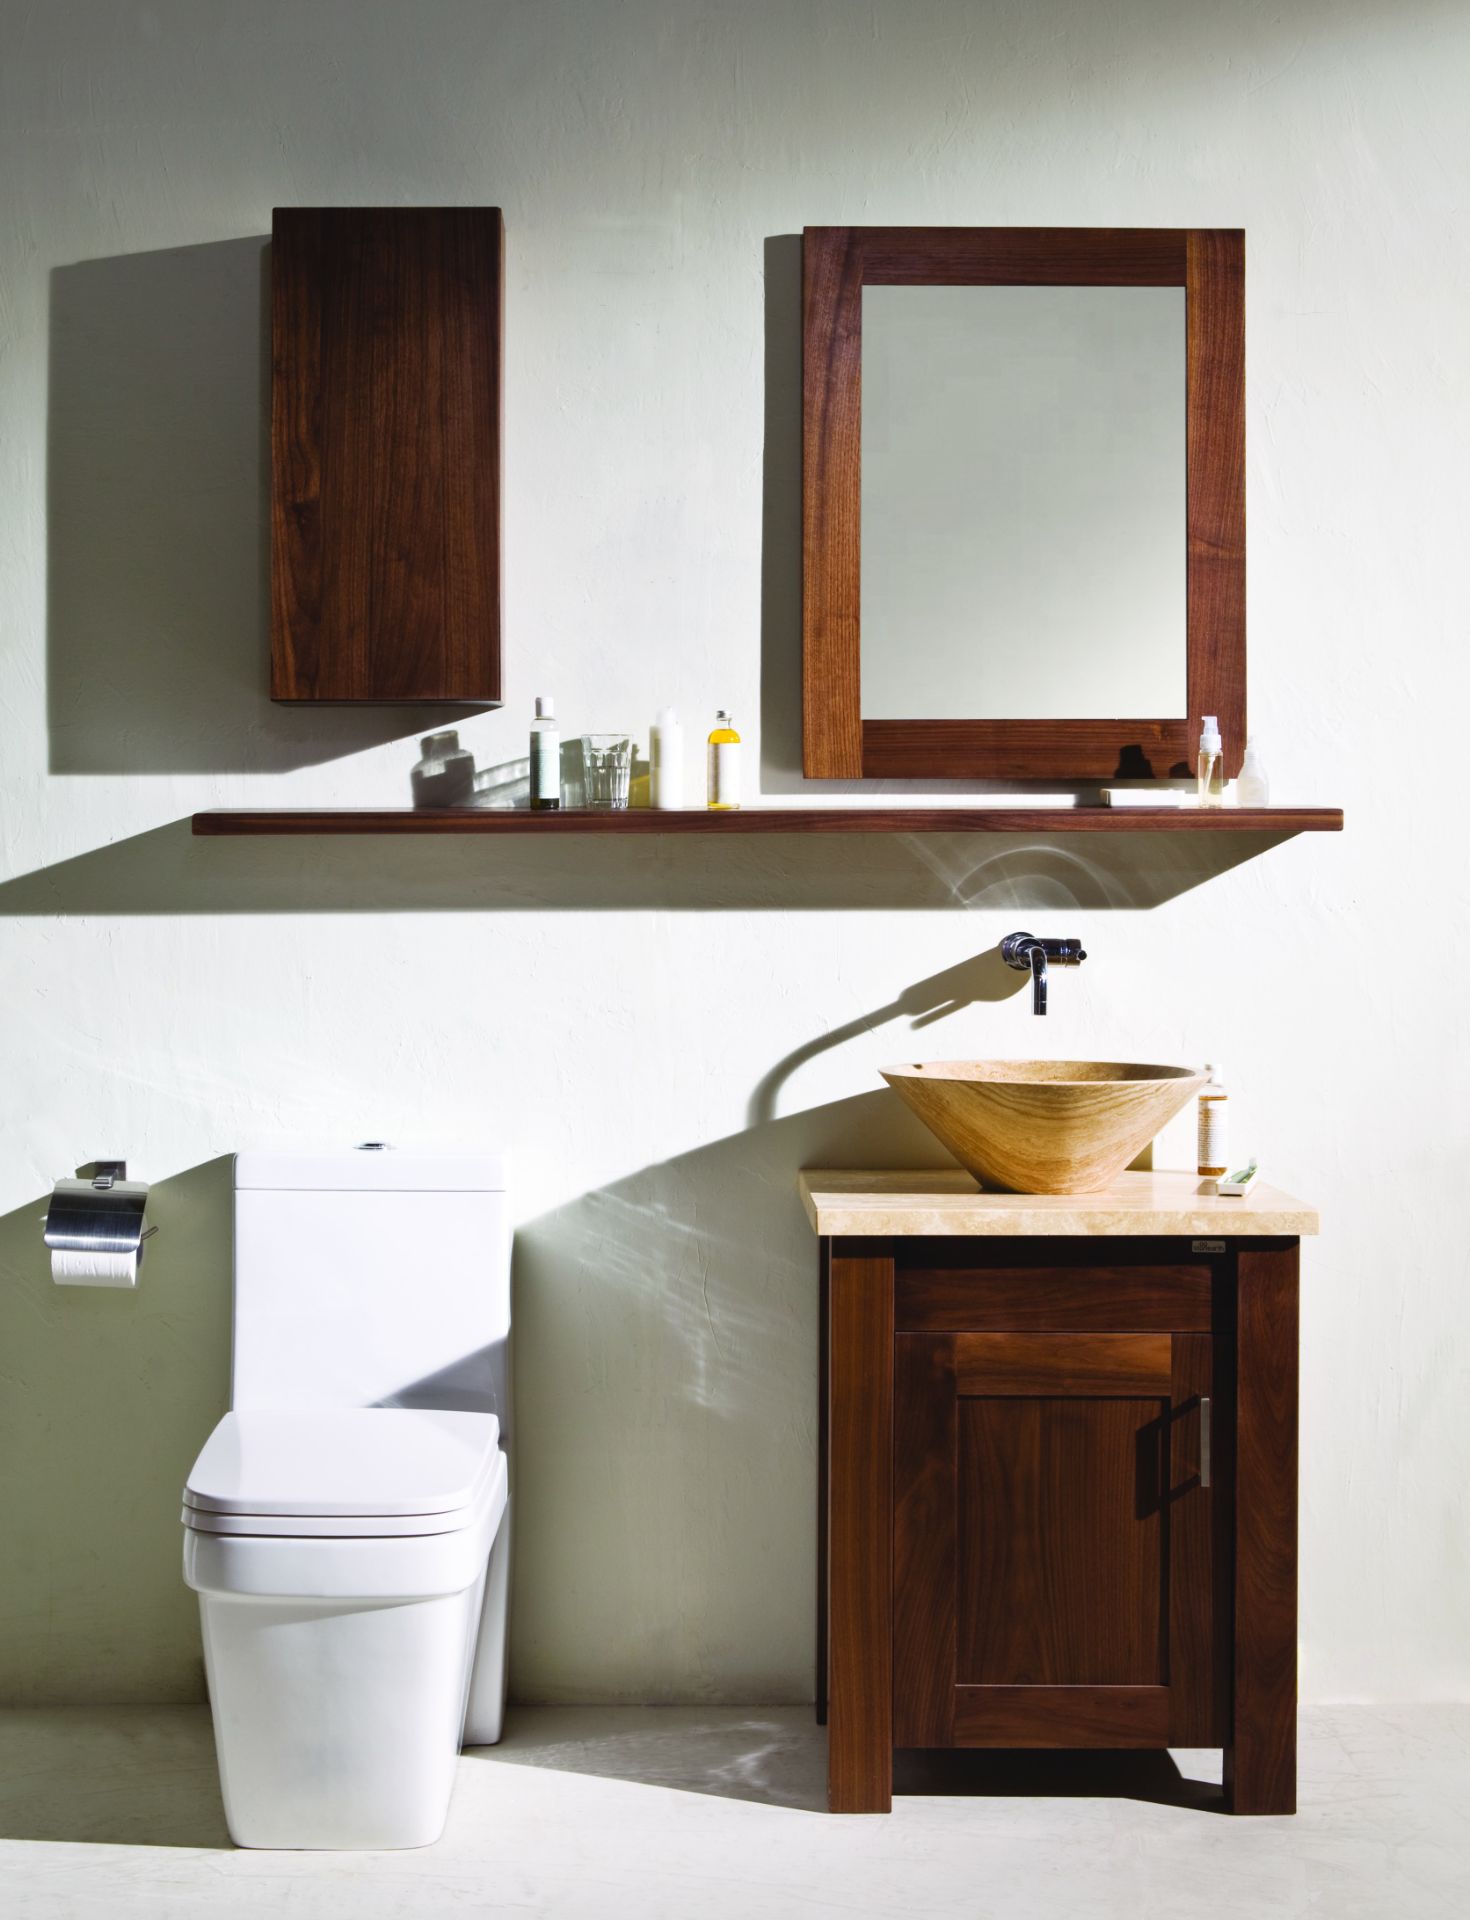 1 x Stonearth Bathroom Storage Shelf With Concealed Brackets - American Solid Walnut - Size: 1500mm - Image 4 of 16